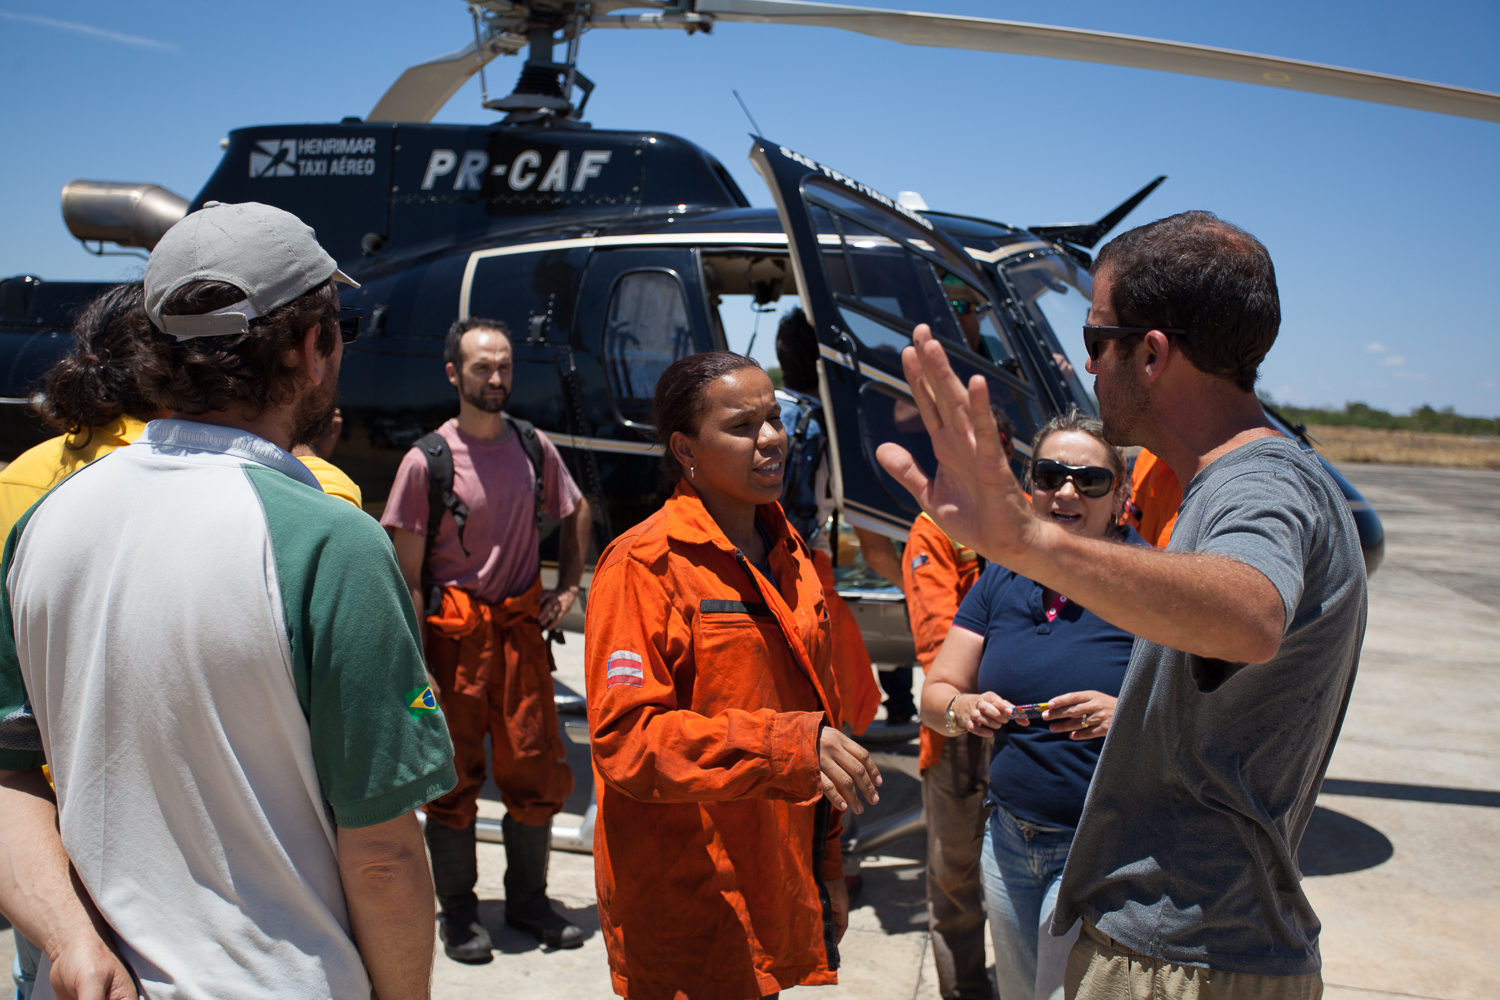 Marta Ferrera speaks with a helicopter crew in November 2015. She has a fear of heights, she said, and went in the helicopter once, but prefers to stay on the ground. Photo by Açony Santos